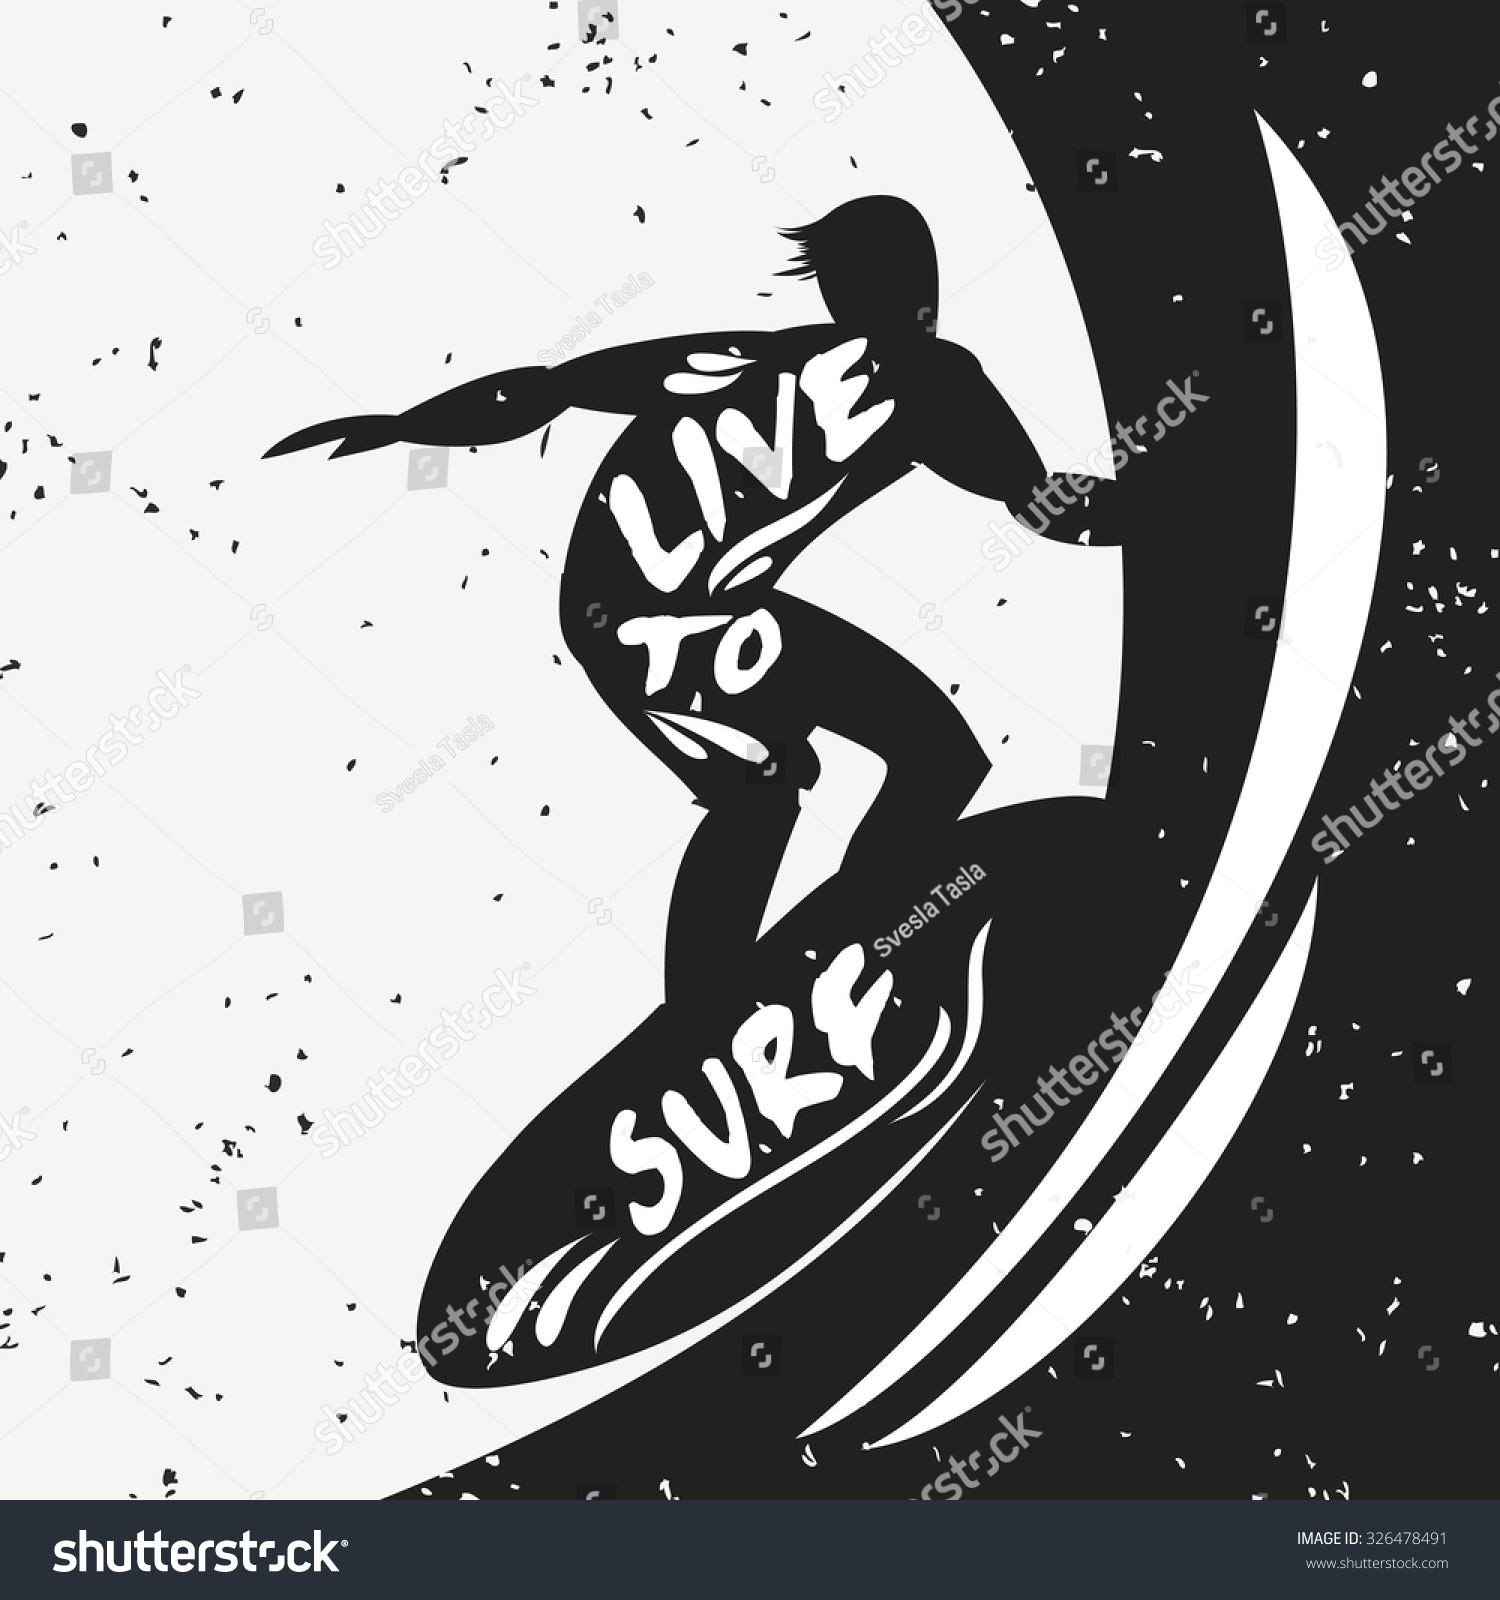 Creative Poster Surfer Silhouette On Grunge Stock Vector 326478491 ...